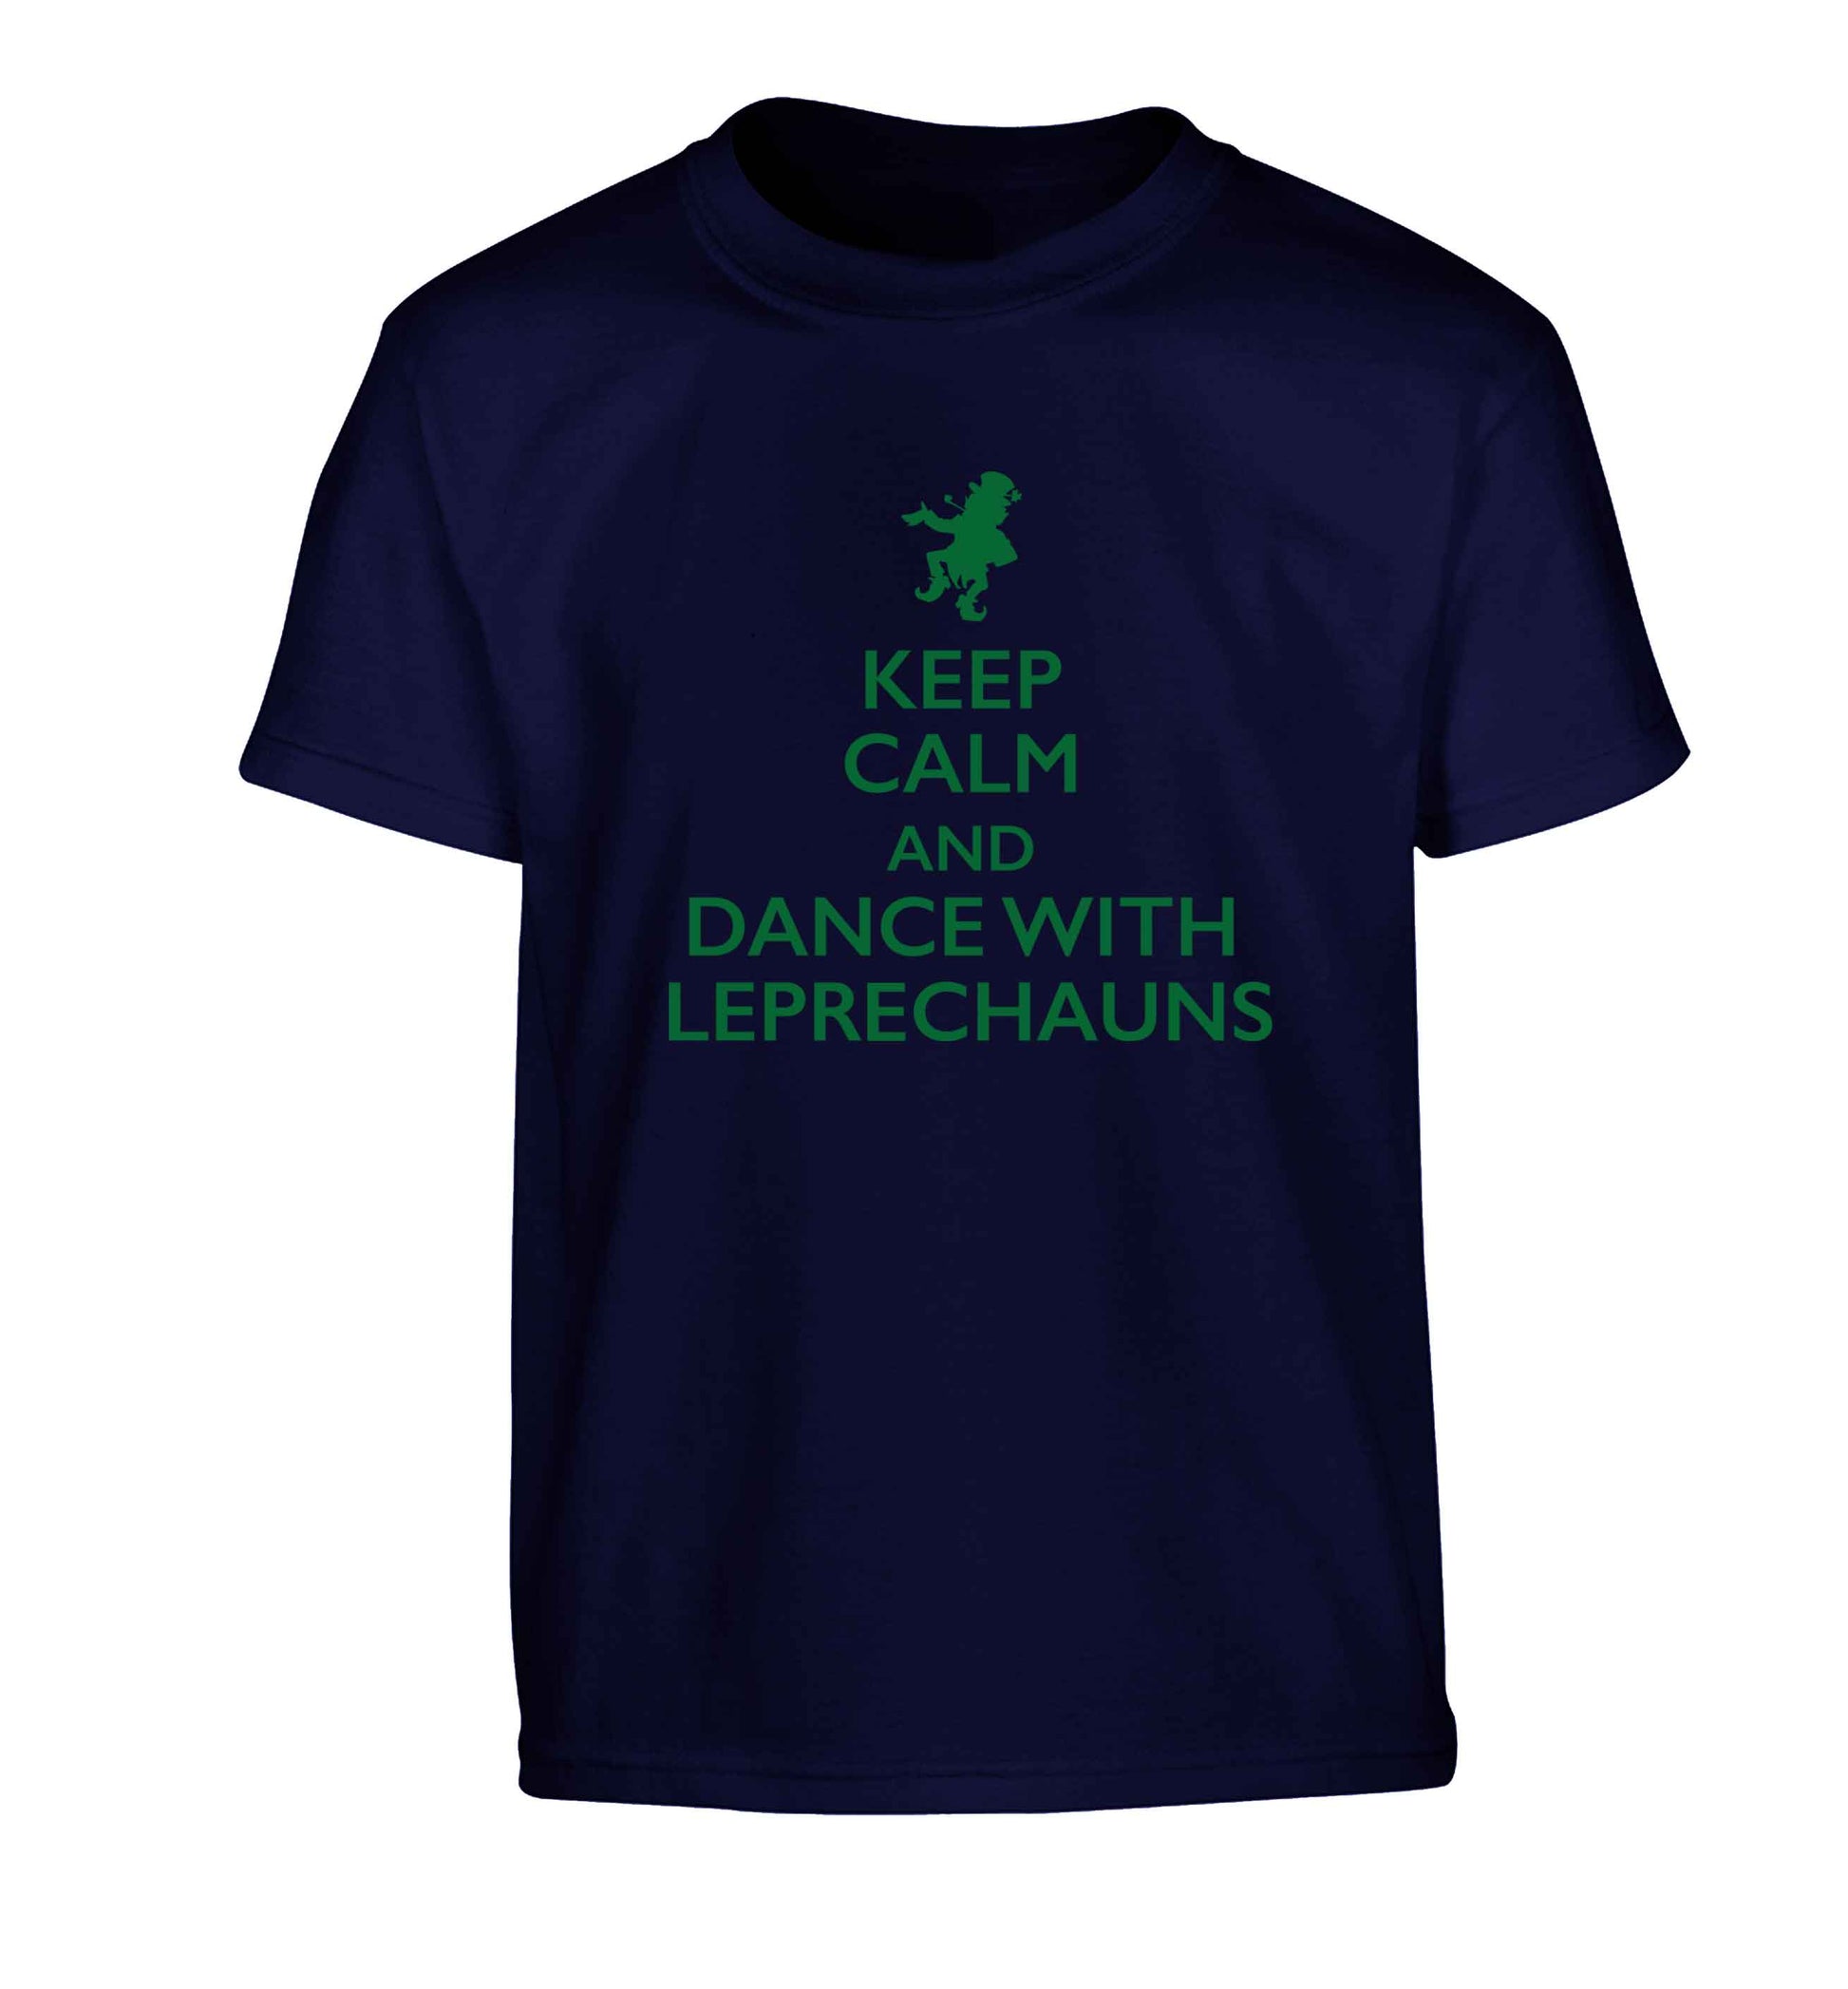 Keep calm and dance with leprechauns Children's navy Tshirt 12-13 Years